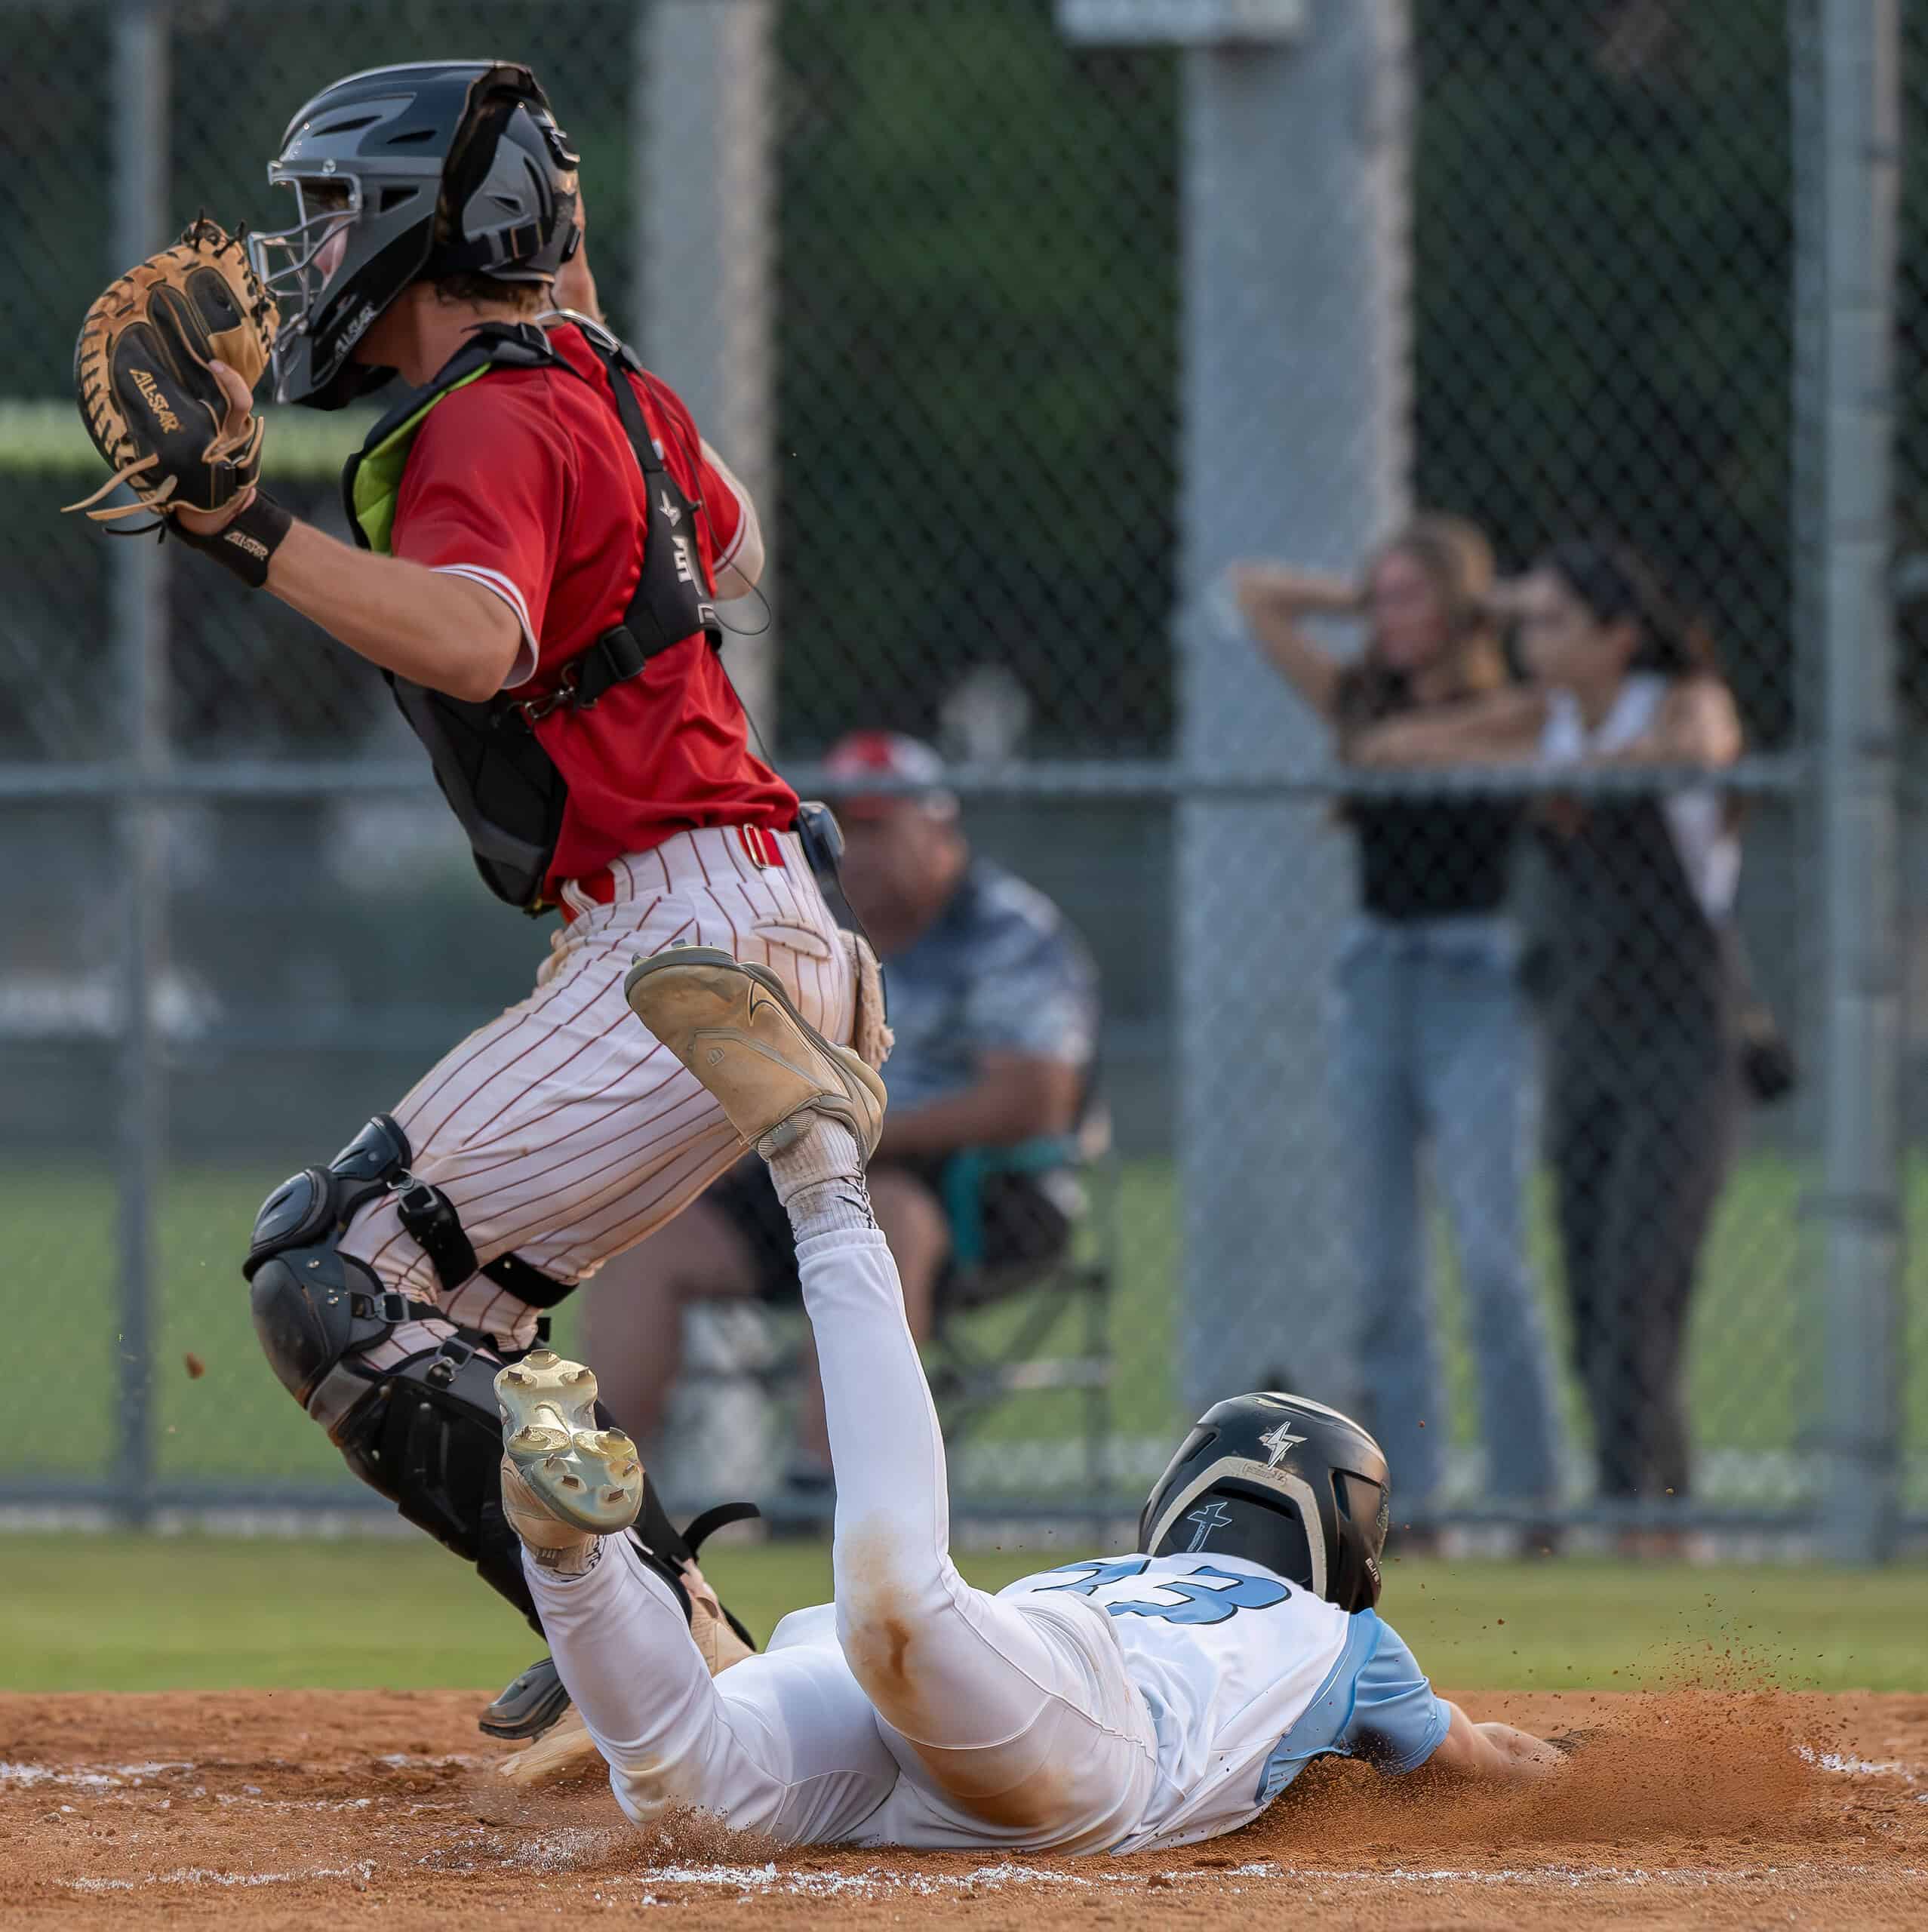 Nature Coast Tech, 33, Cashis Williams slides headfirst into home plate scoring what turned out to be the winning run in the 4A Regional Quarterfinal game versus visiting Satellite High. Photo by [Joseph Dicristofalo]